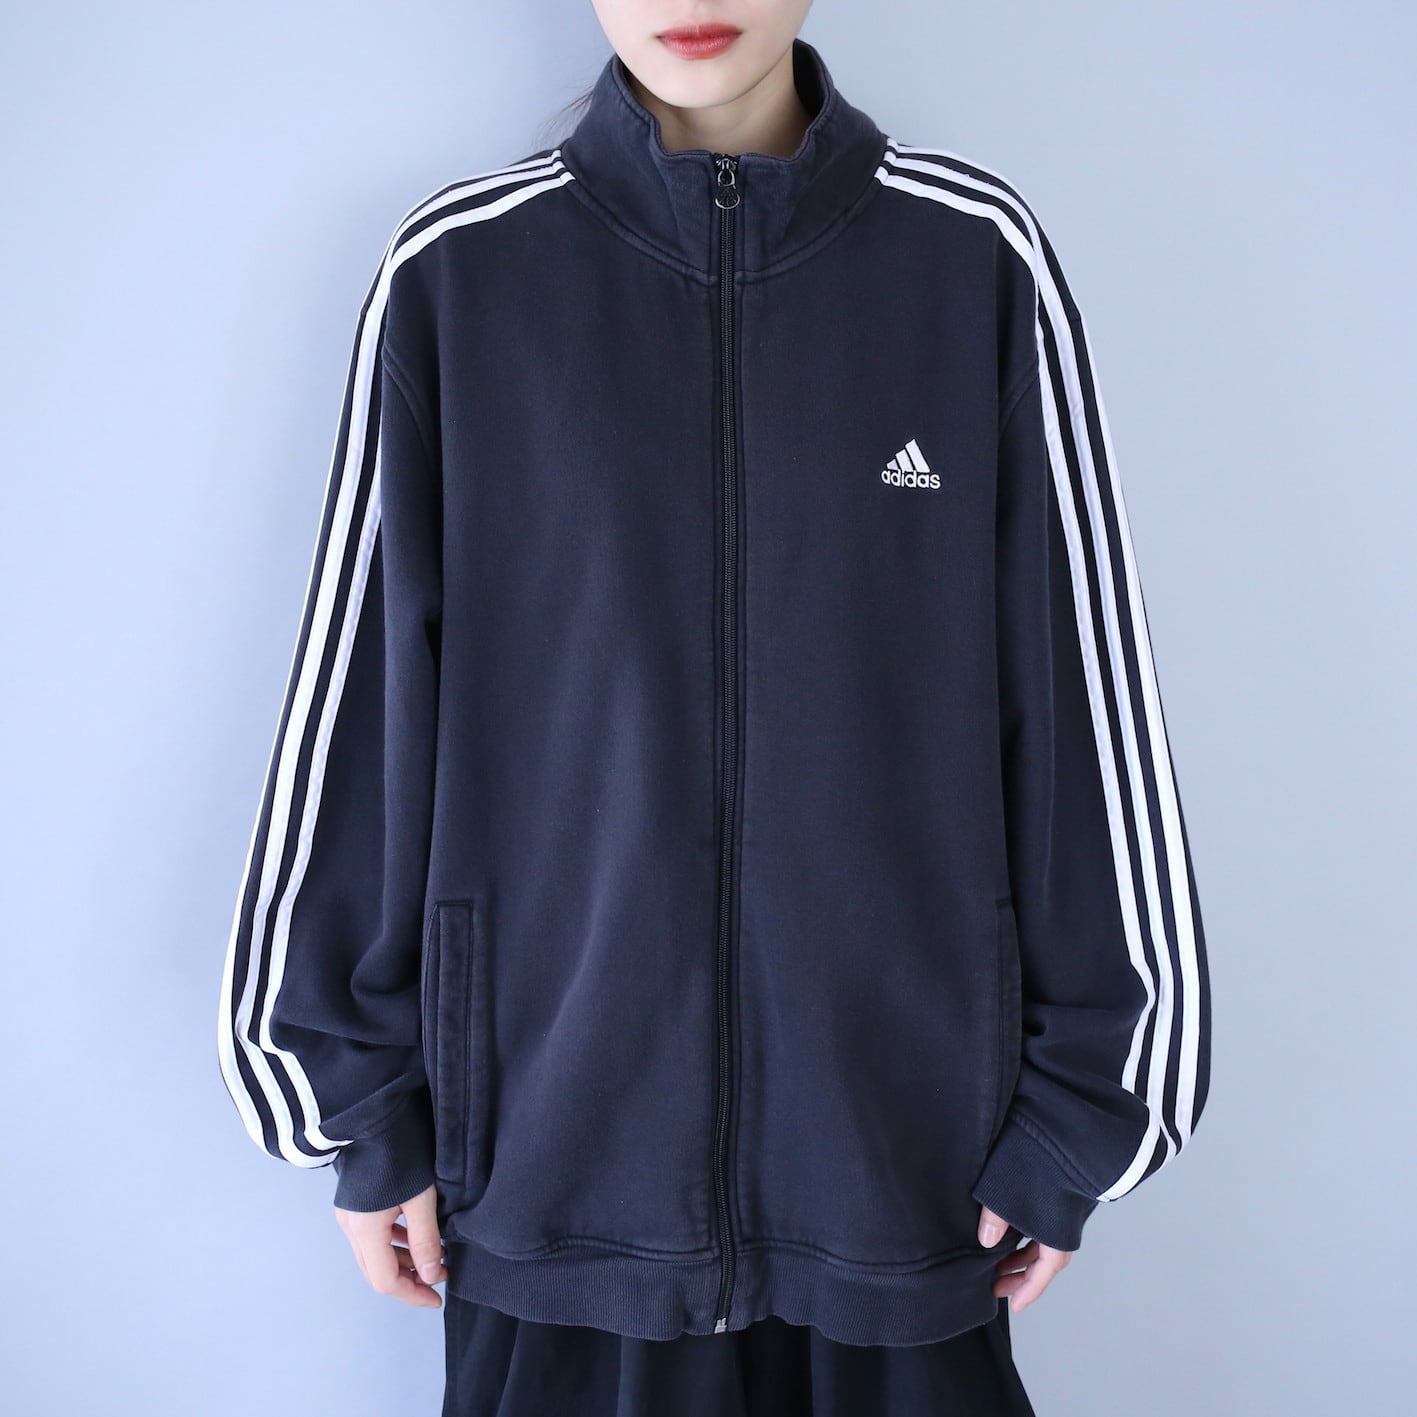 "adidas" one point logo embroidery  loose silhouette track jacket